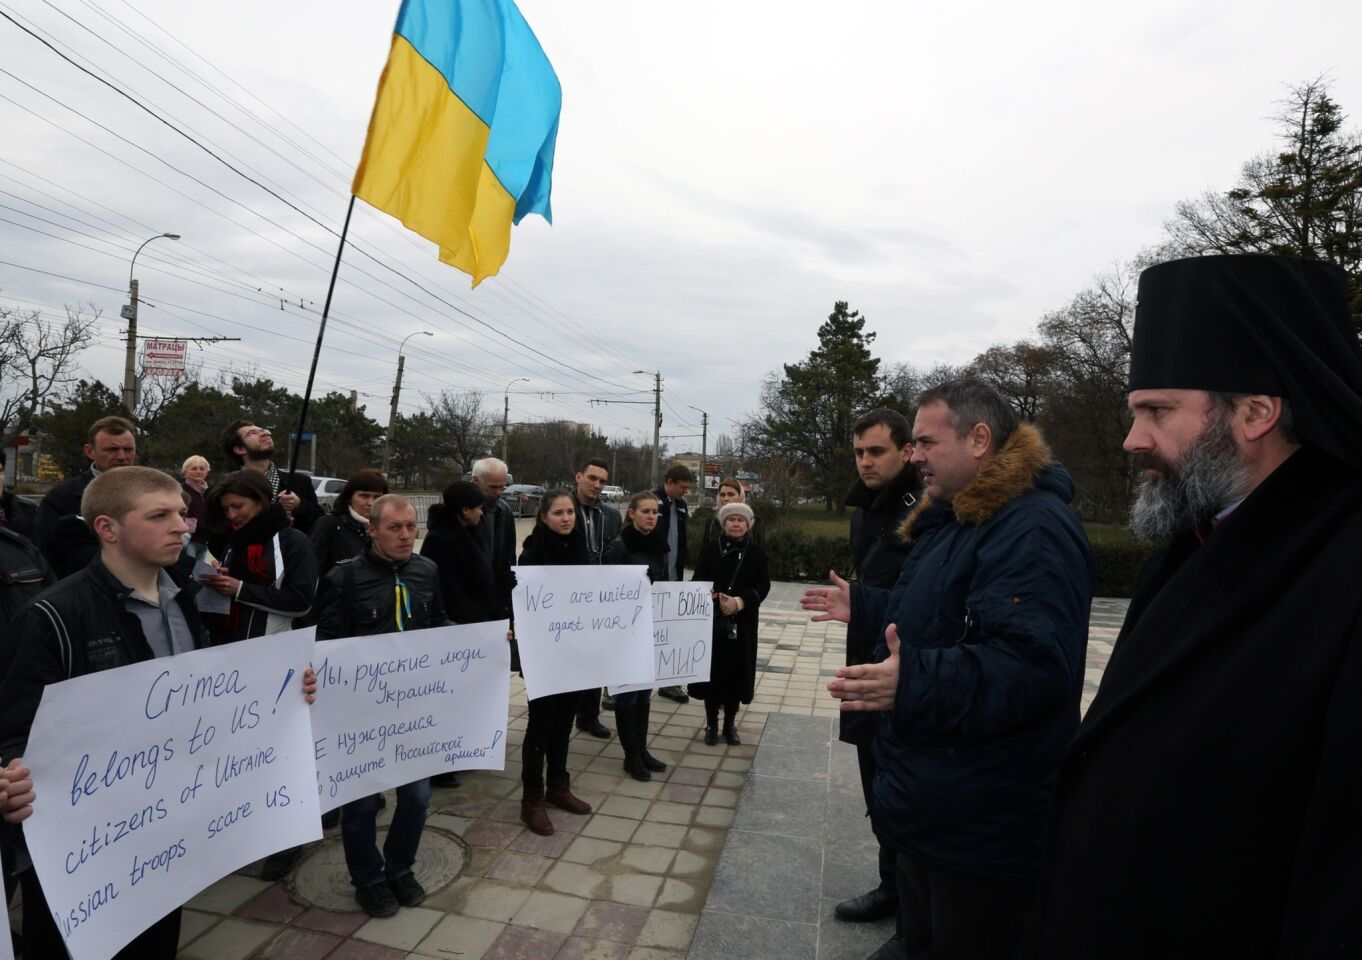 Demonstrators rally in Simferopol, a city in Ukraine's Crimea region. One of their signs says, "Crimea belongs to us! Citizens of Ukraine. Russian troops scare us." Another says, "We are united against war!"